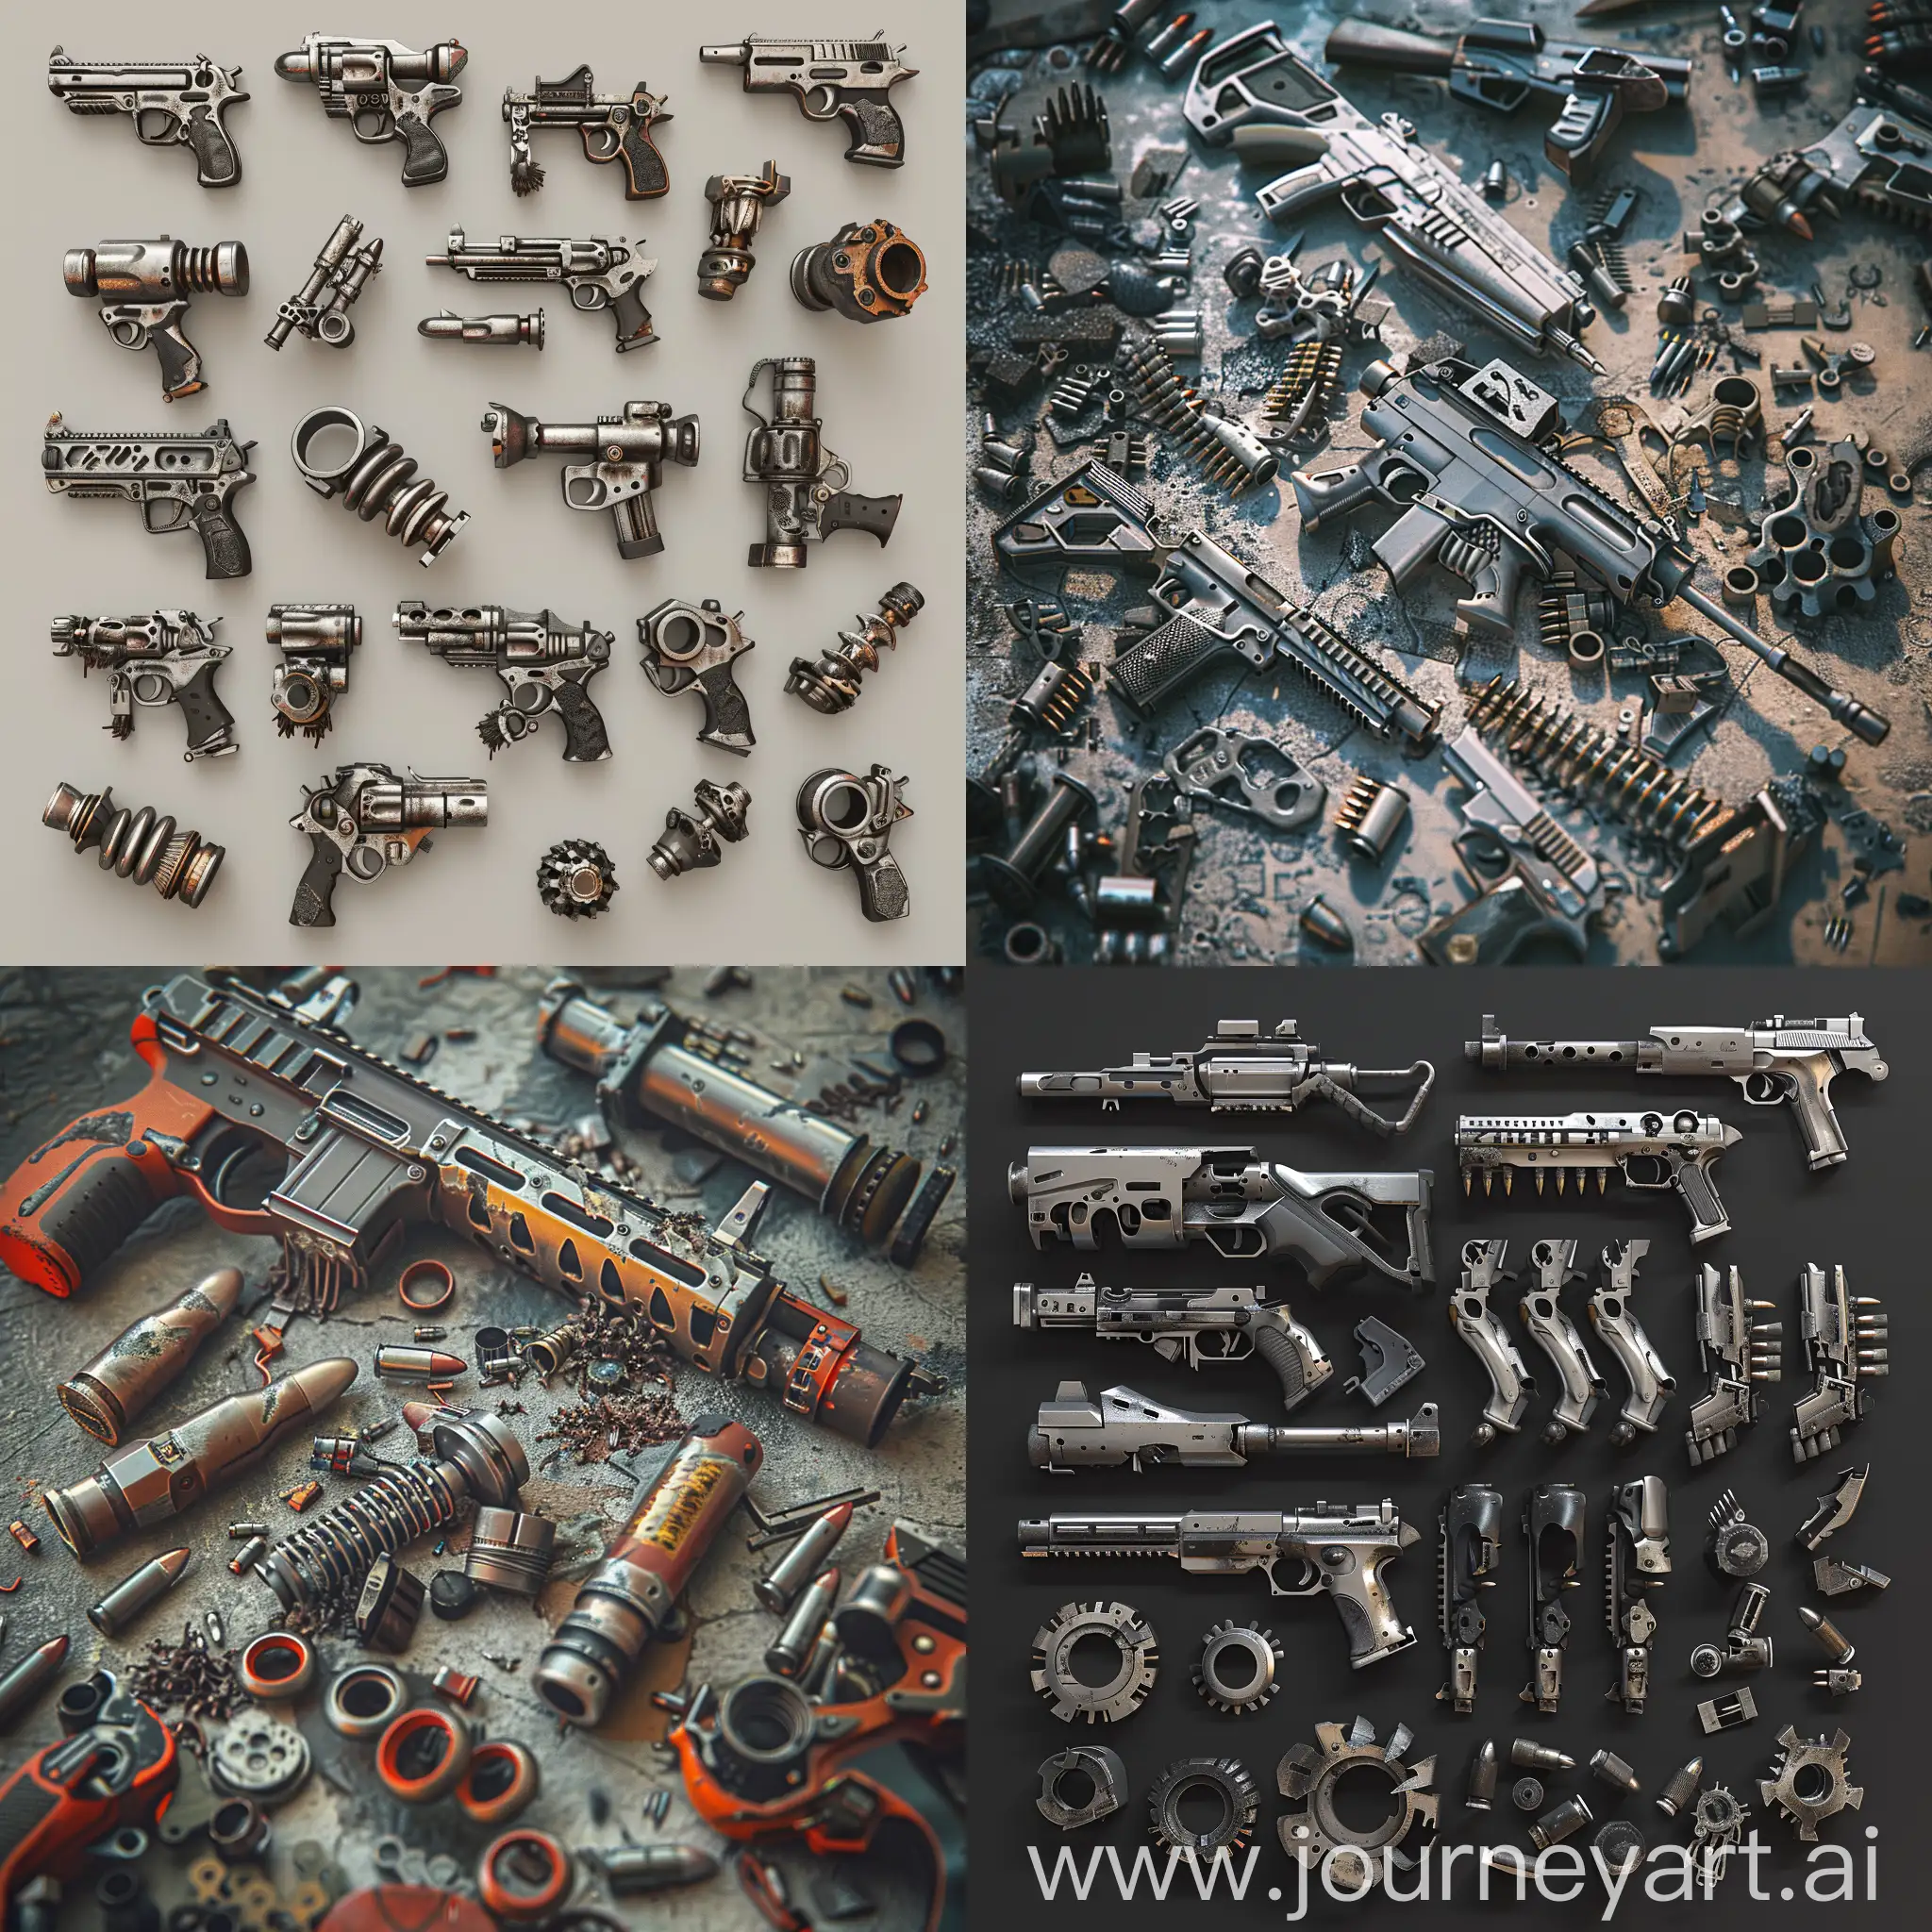 https://i.imgur.com/Z0NW0sA.png realistic photo of isometric set of disassembled gun parts scrap metal bunches worn in style of unreal engine 5 realistic 3d game asset, isometric set, orthographic projection  --no cartoon, anime, minimalistic  --chaos 15